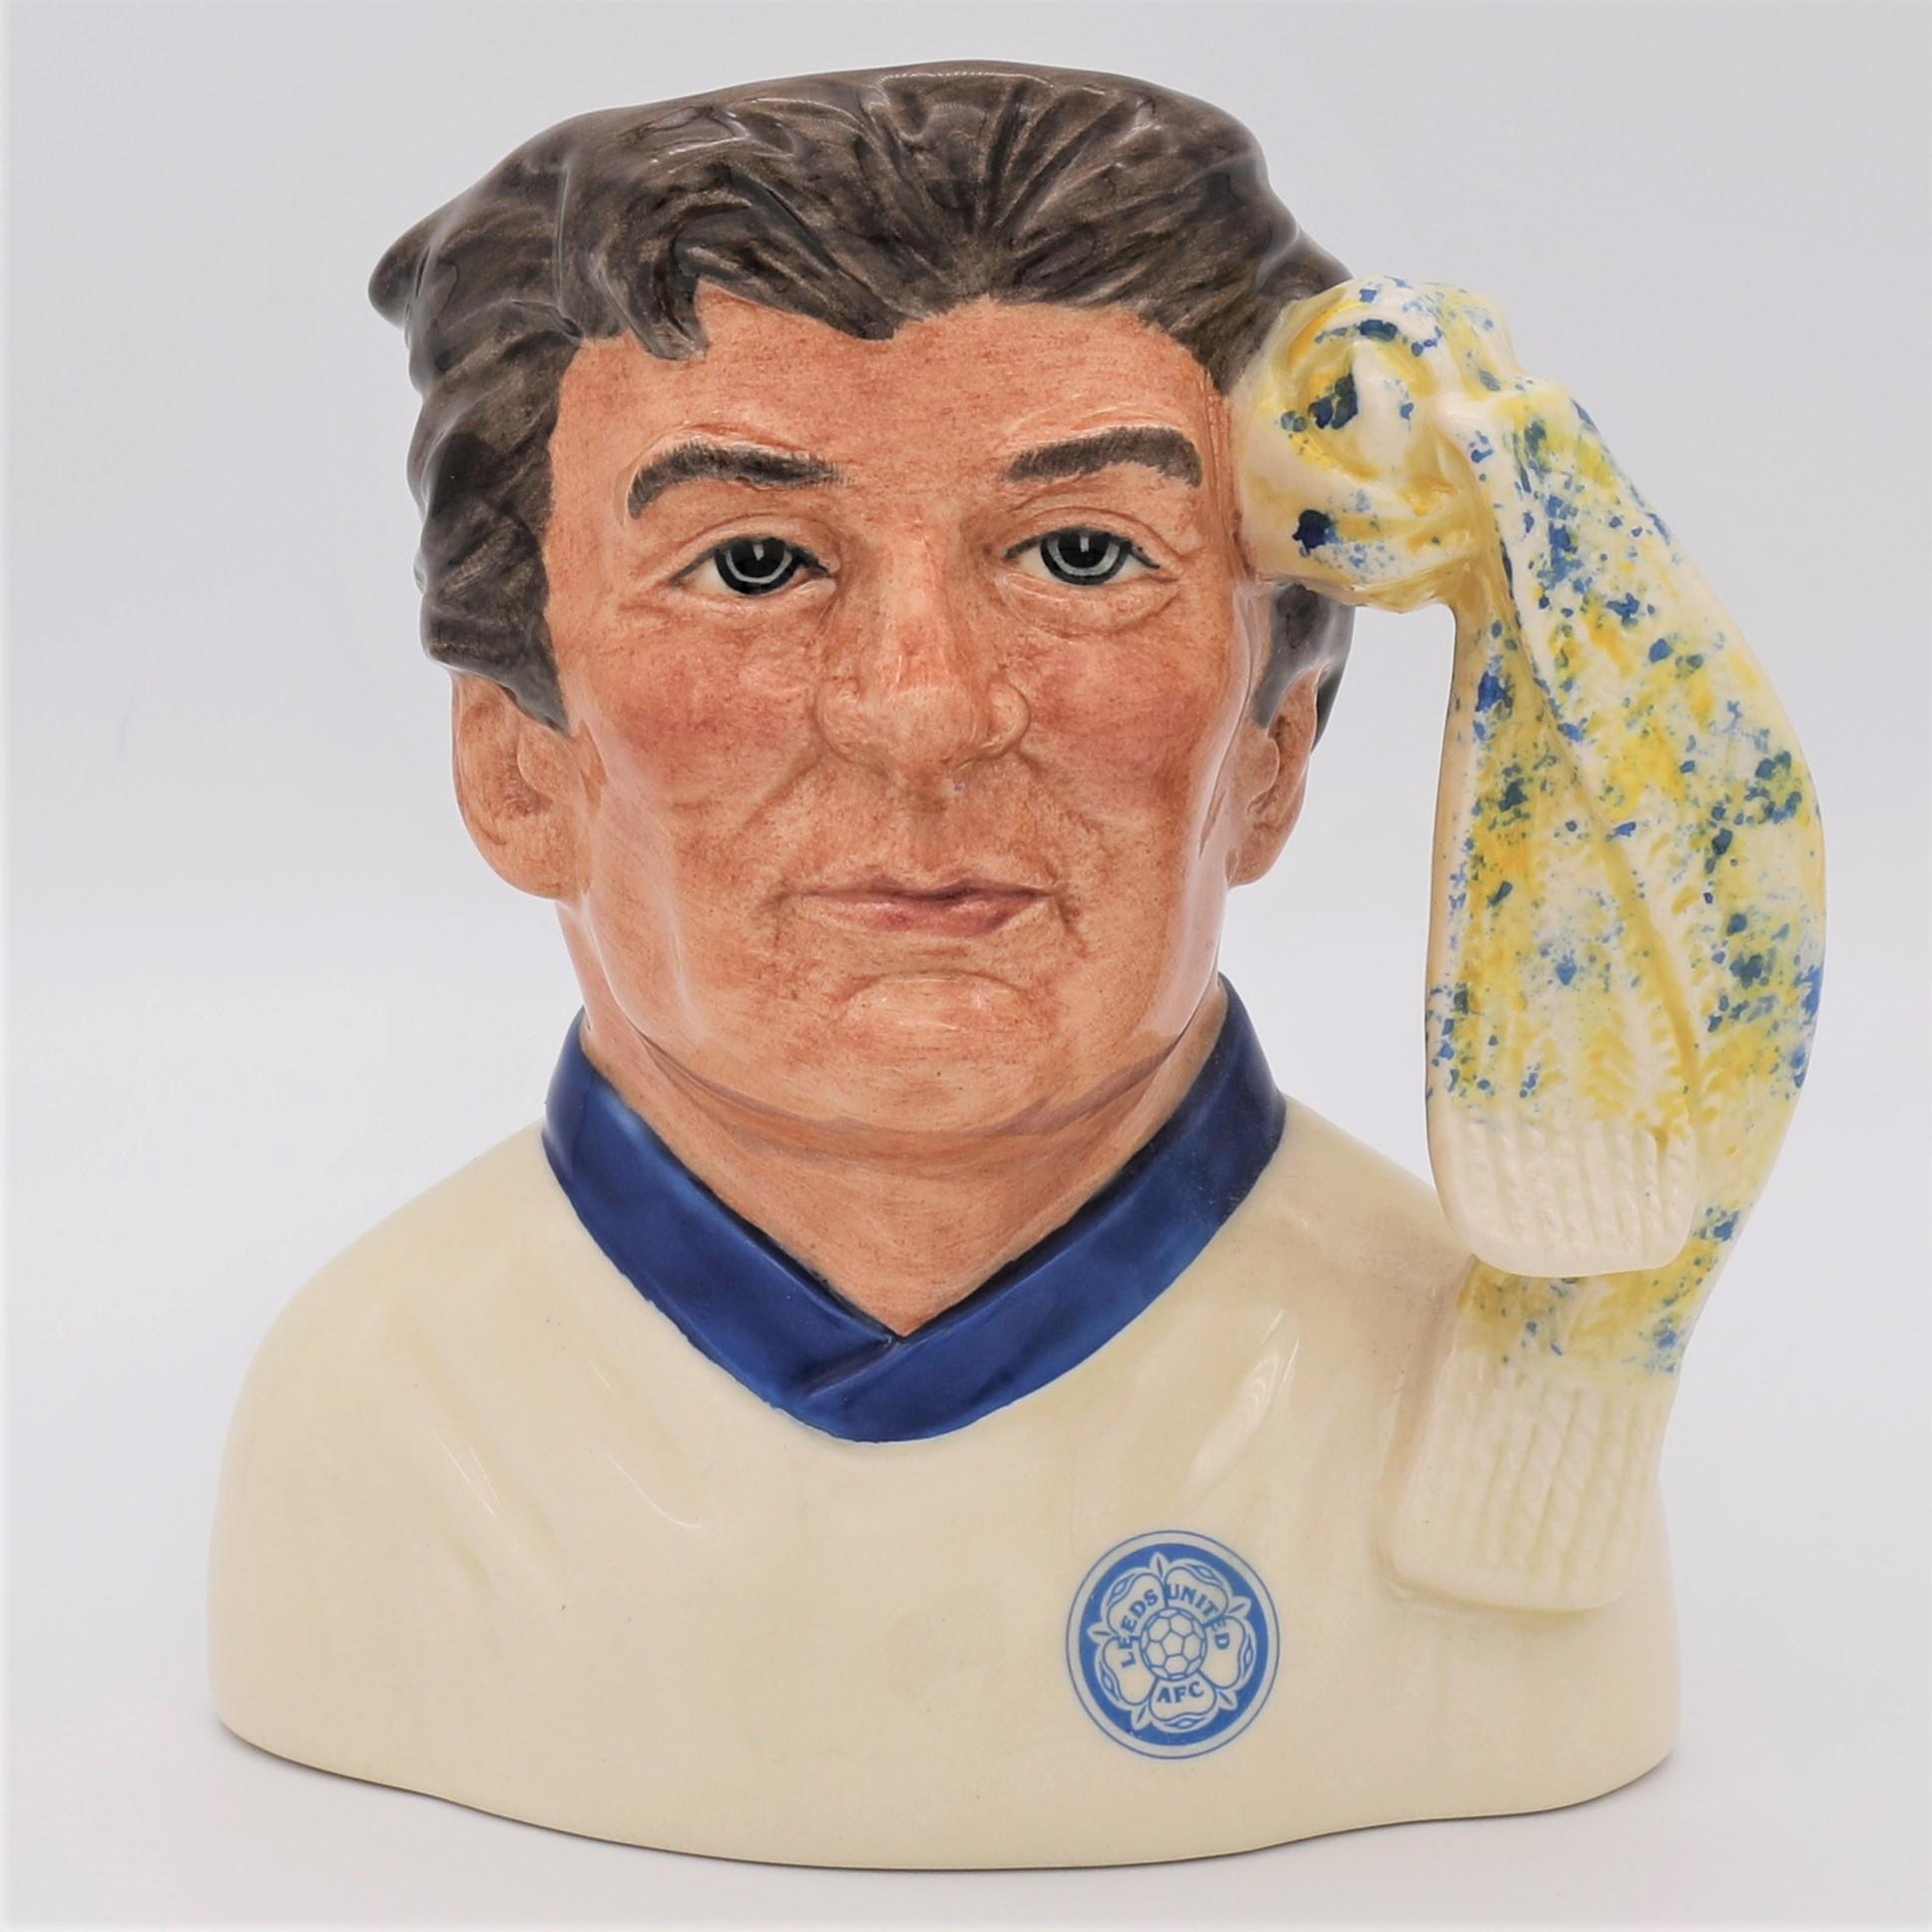 Royal Doulton D6928 Leeds United Football Supporter Character Jug - front